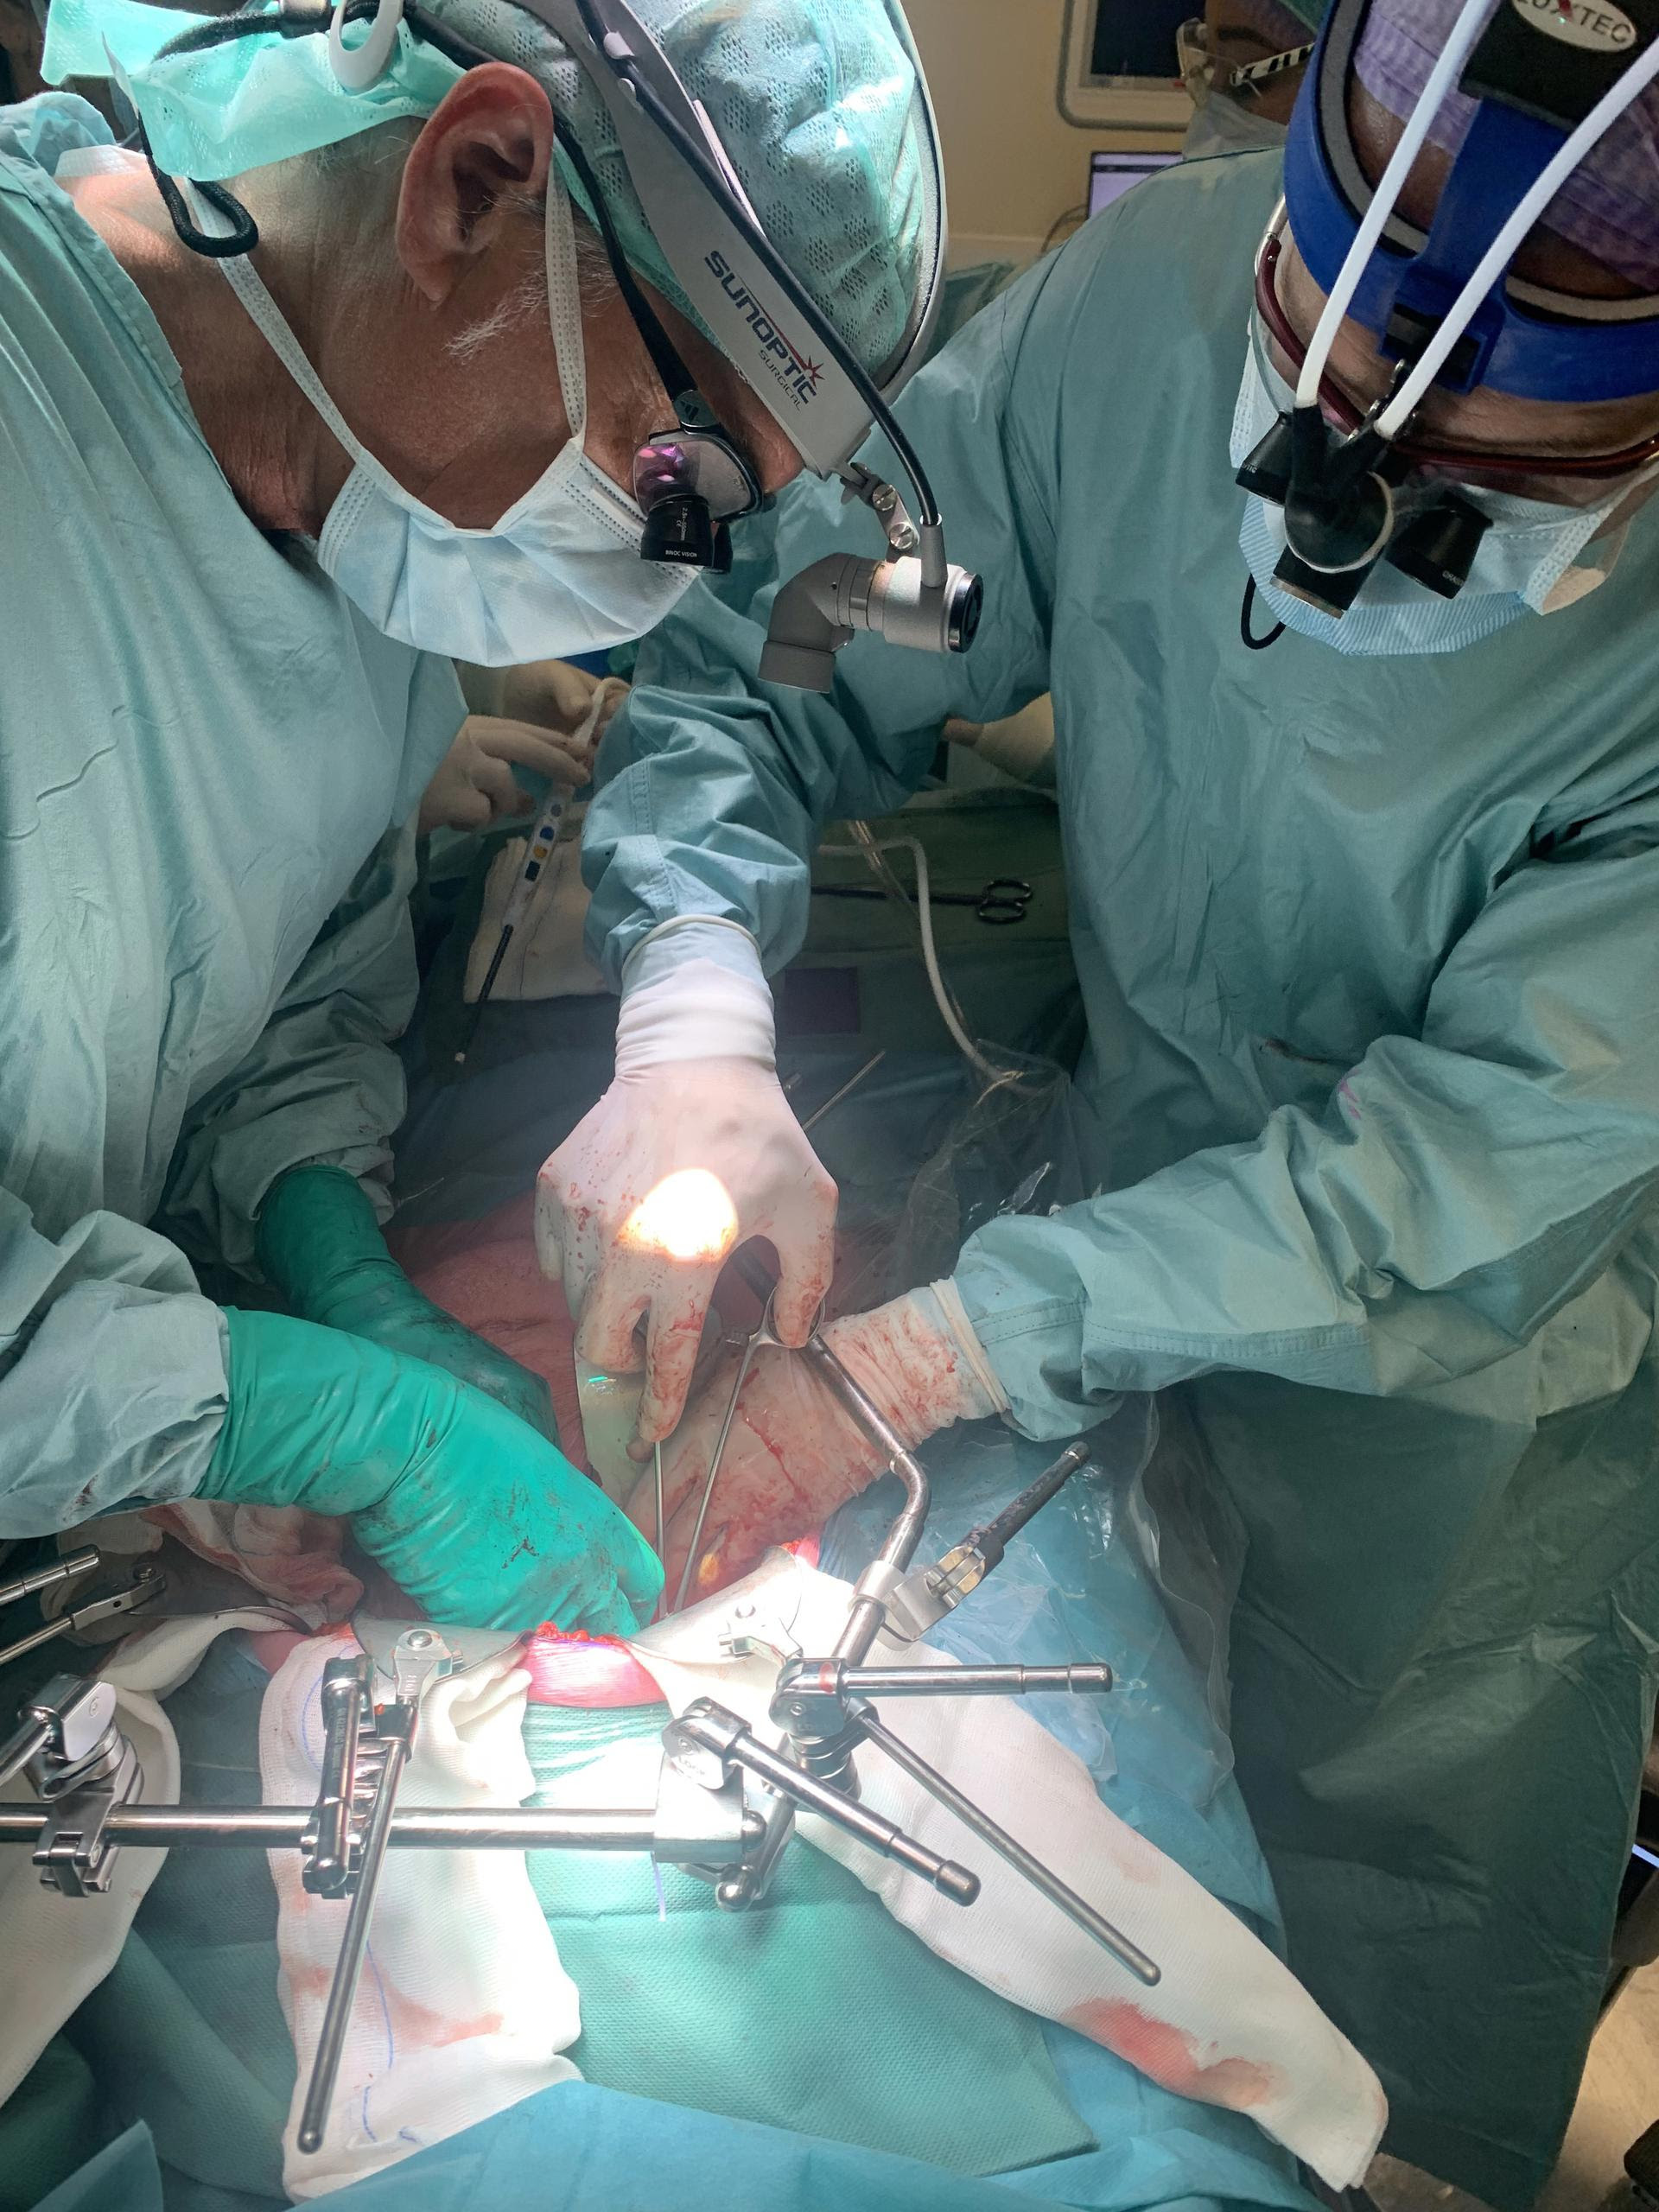 A large team of heart surgeons, liver surgeons, and other specialists performed the unique transplant, which took almost 24 hours in total.